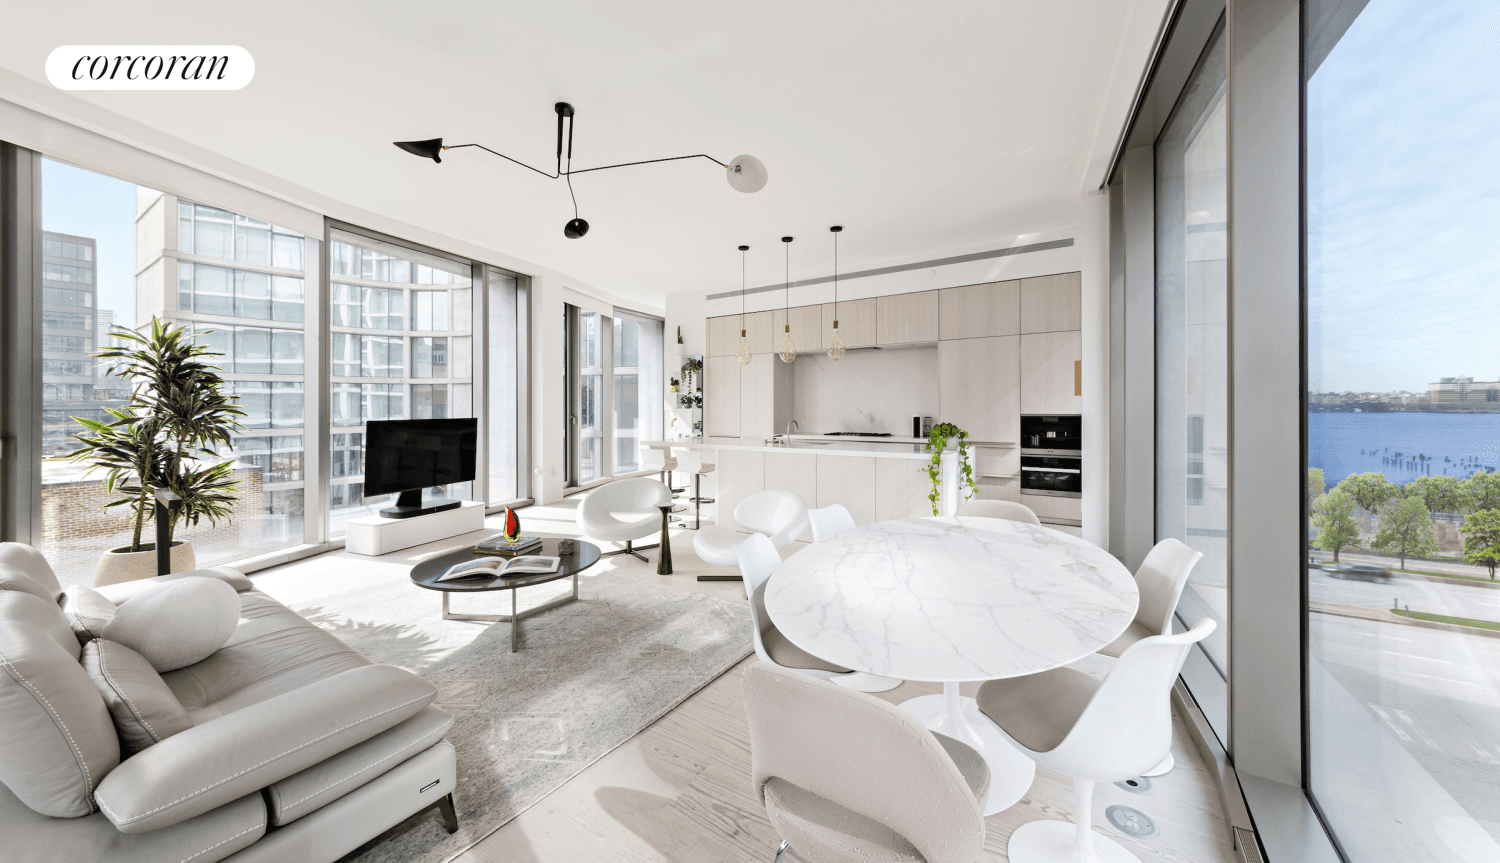 This phenomenal two bedroom, two and a half bathroom condominium is one of the only residences with outdoor space in Ian Schrager's renowned West Village development.